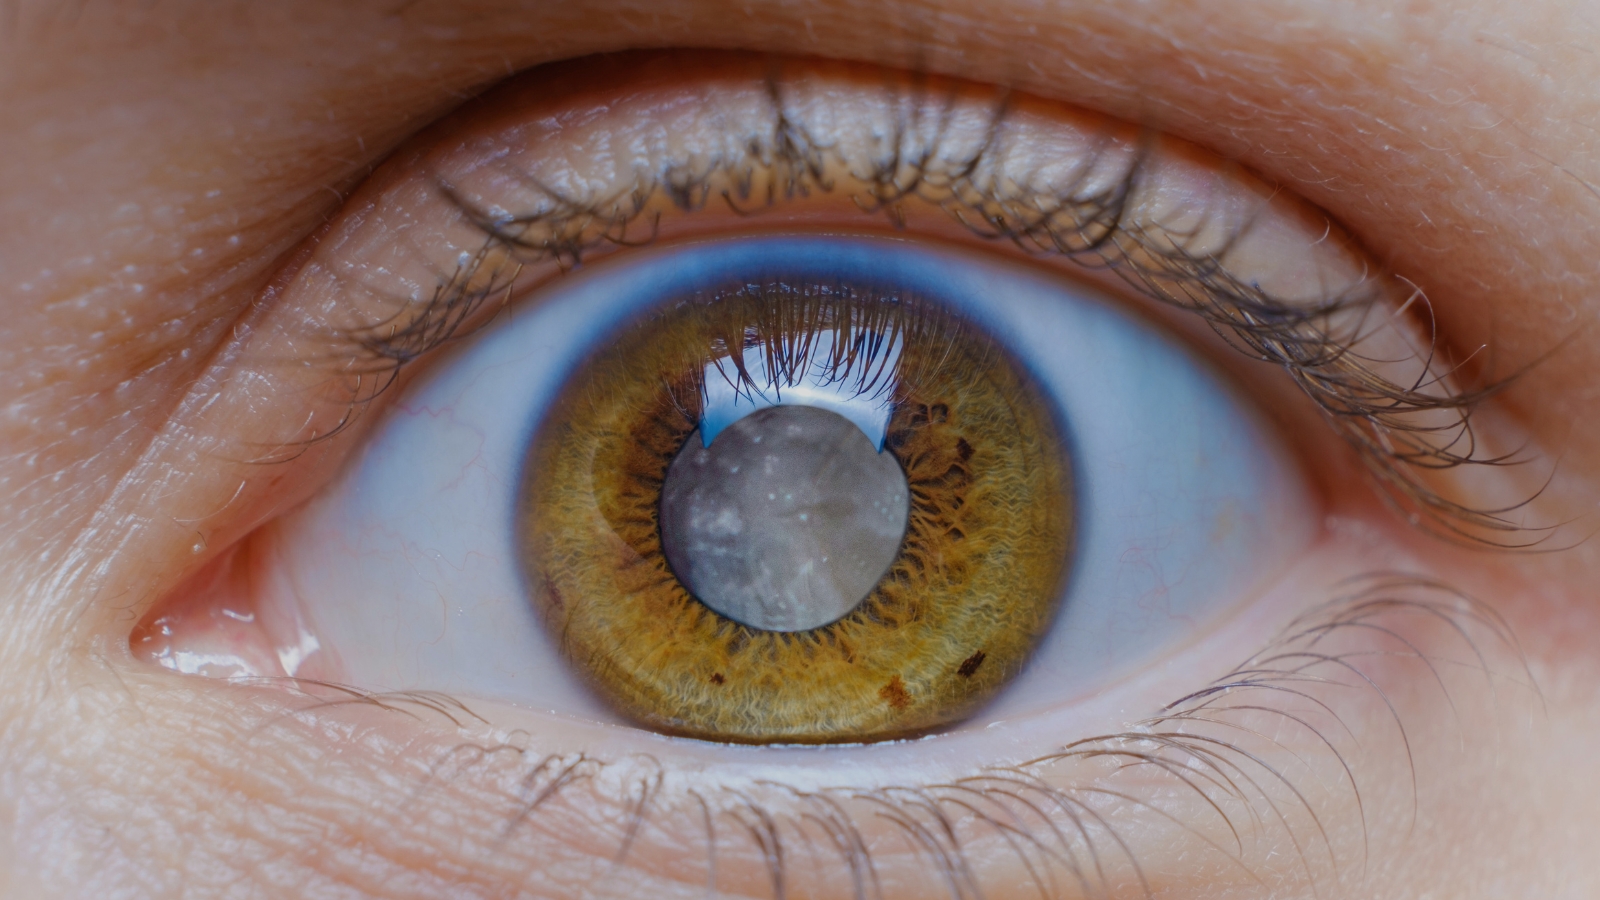 Close-up view of a human eye with detailed capture of the iris, eyelashes, and reflection of a window in the pupil. The eye has a cataract.